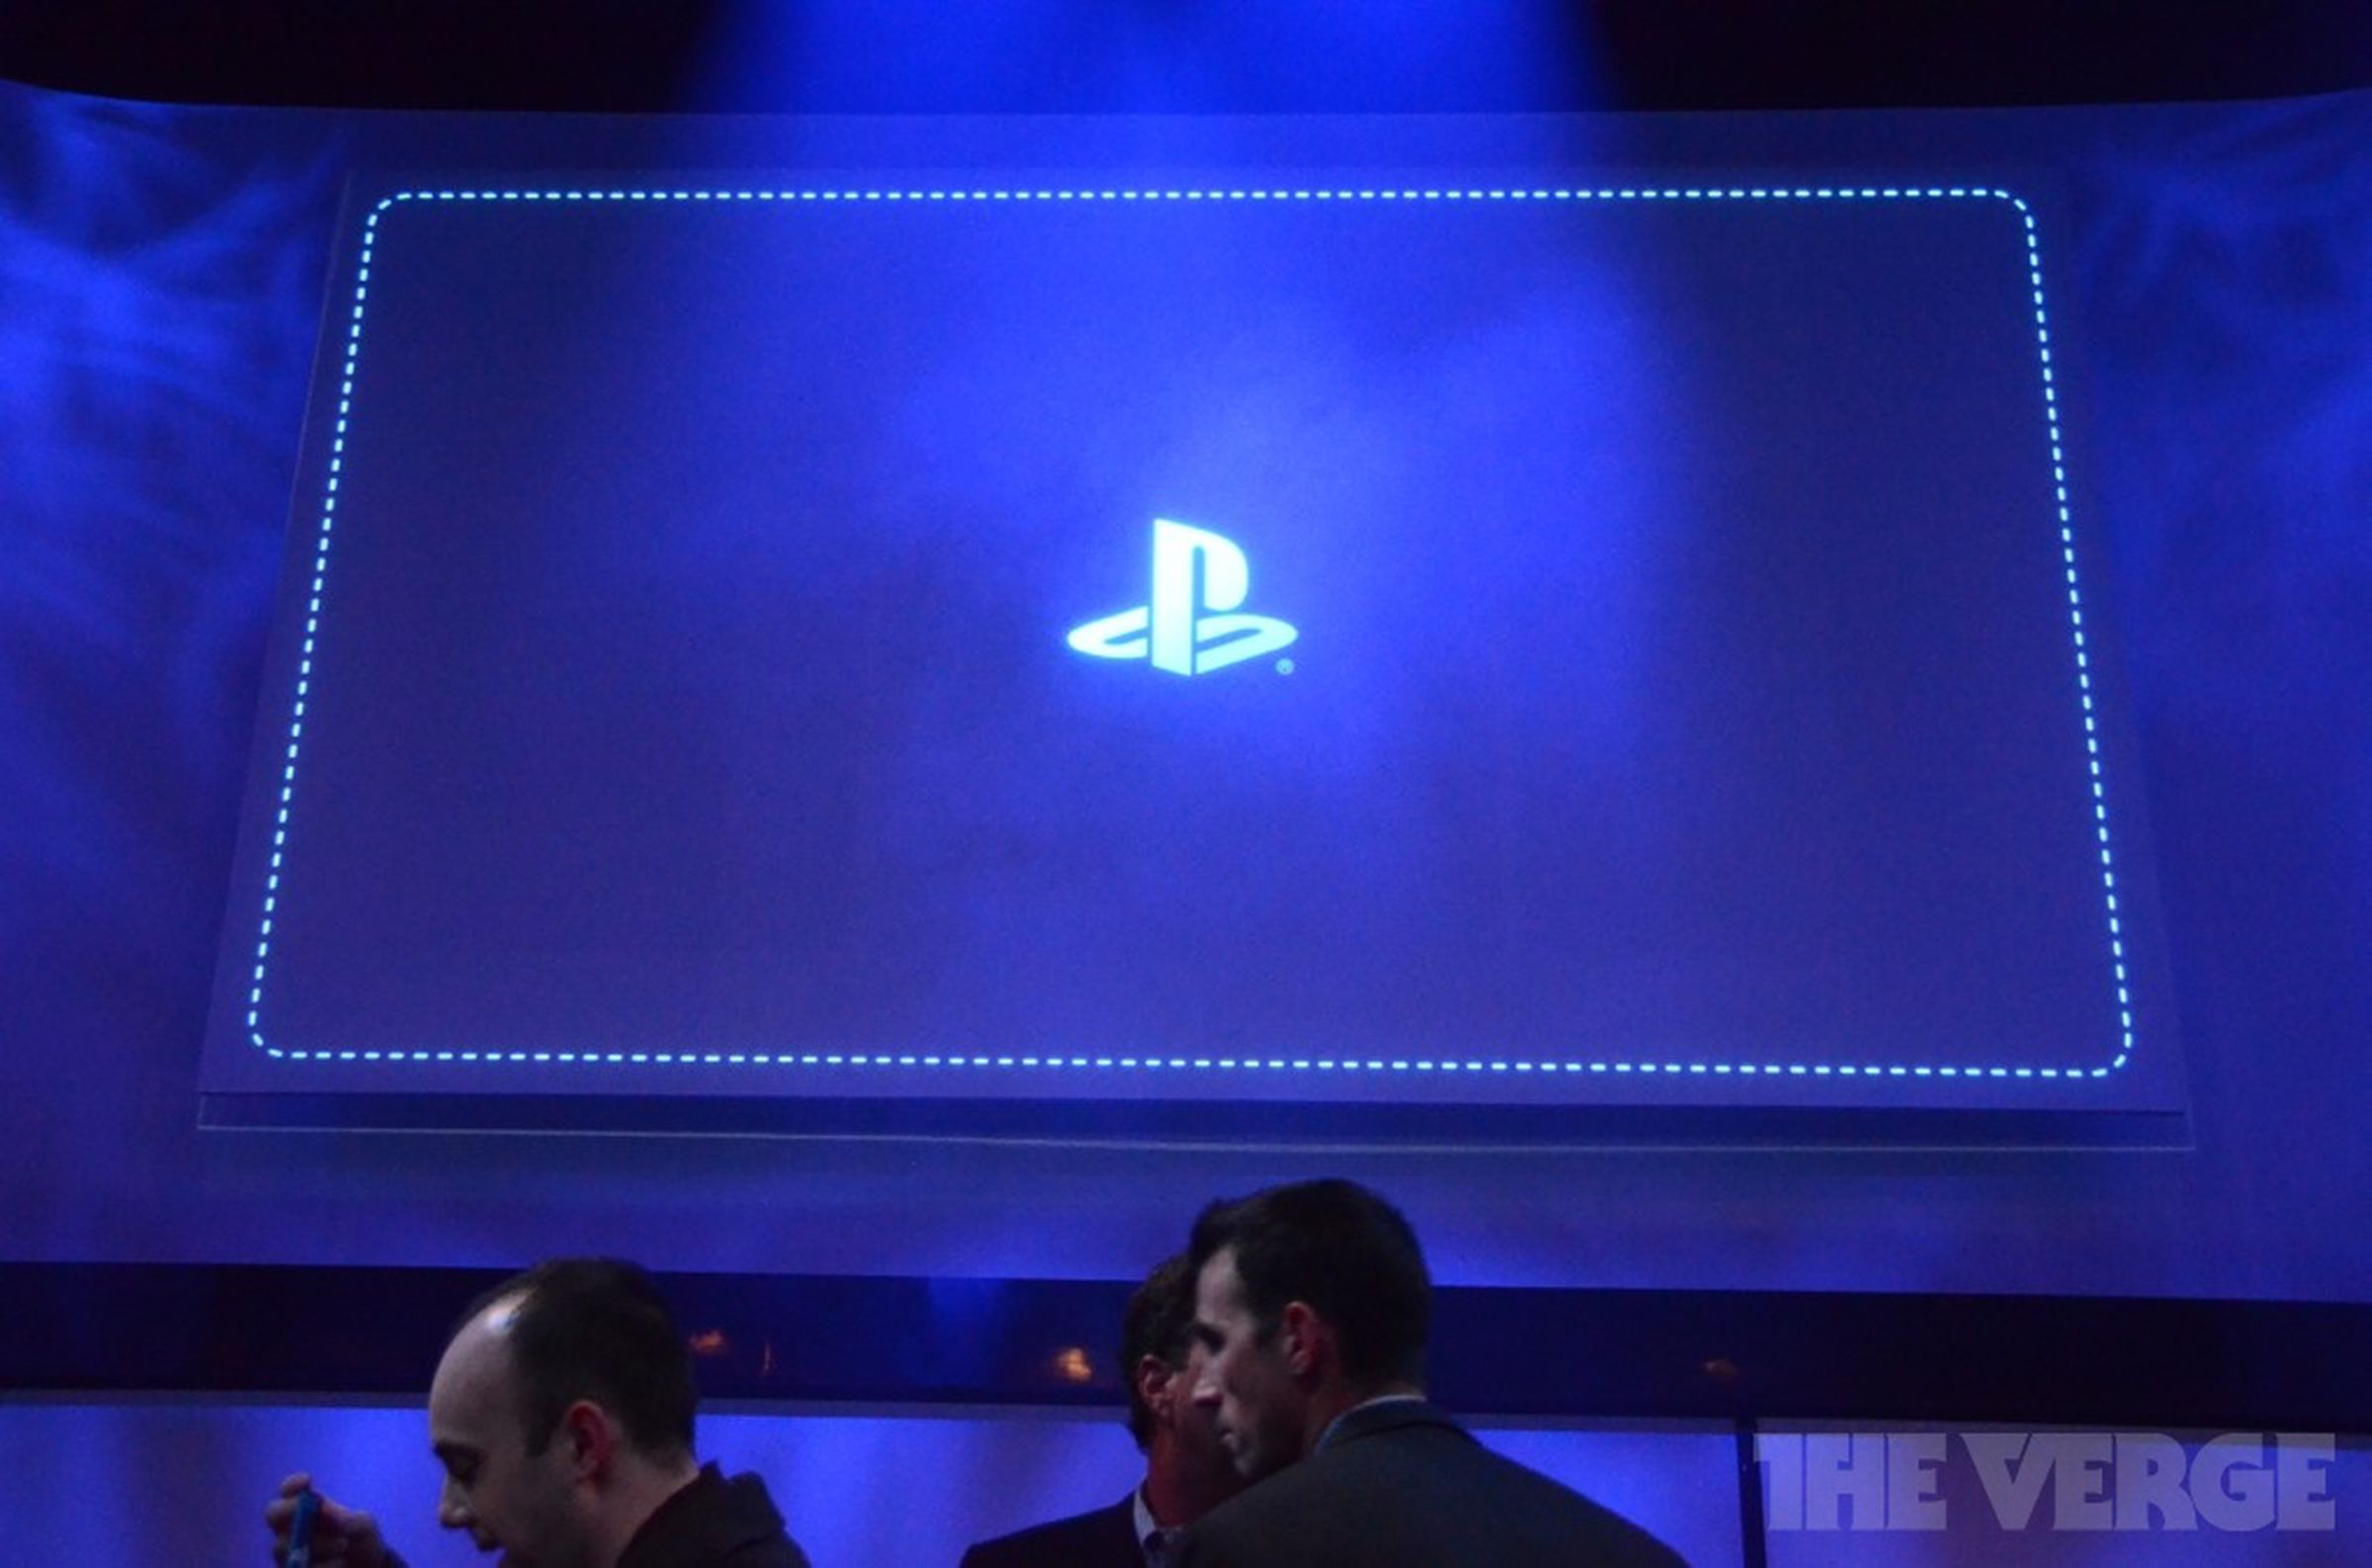 Sony's PlayStation 4 event